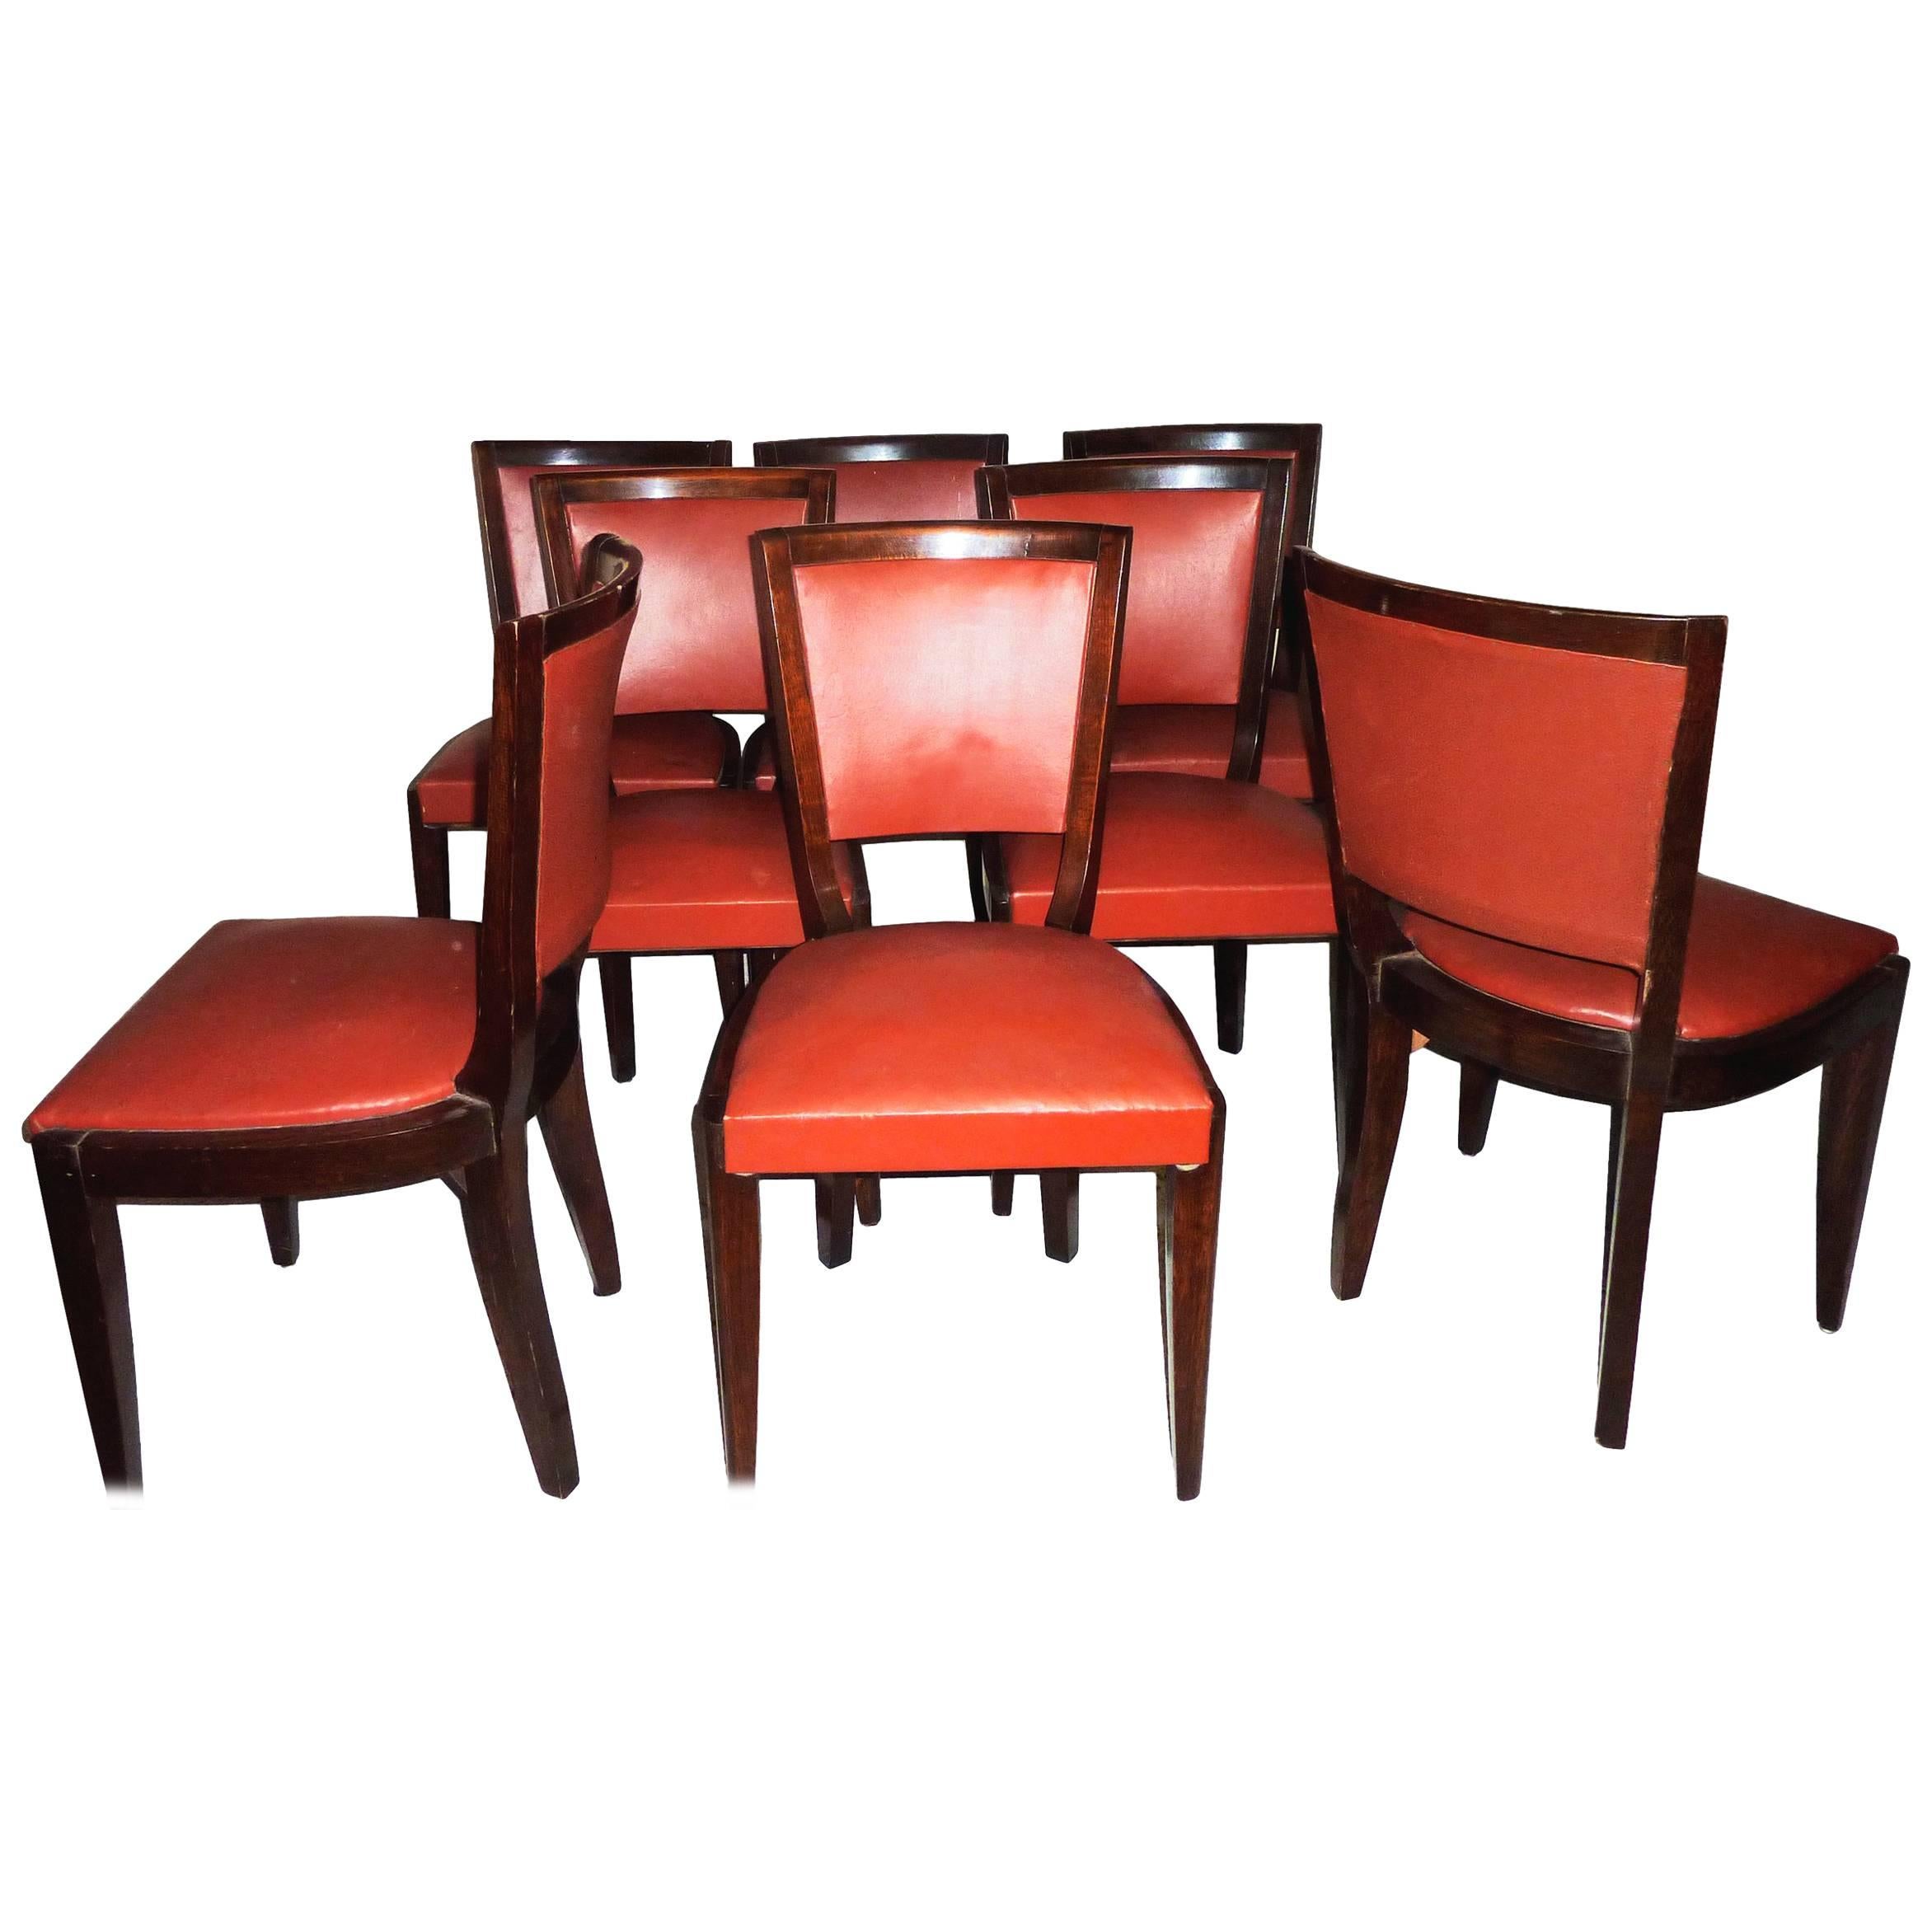 French Mid-Century Modern Set of Eight Dining Room Chairs, 1950s